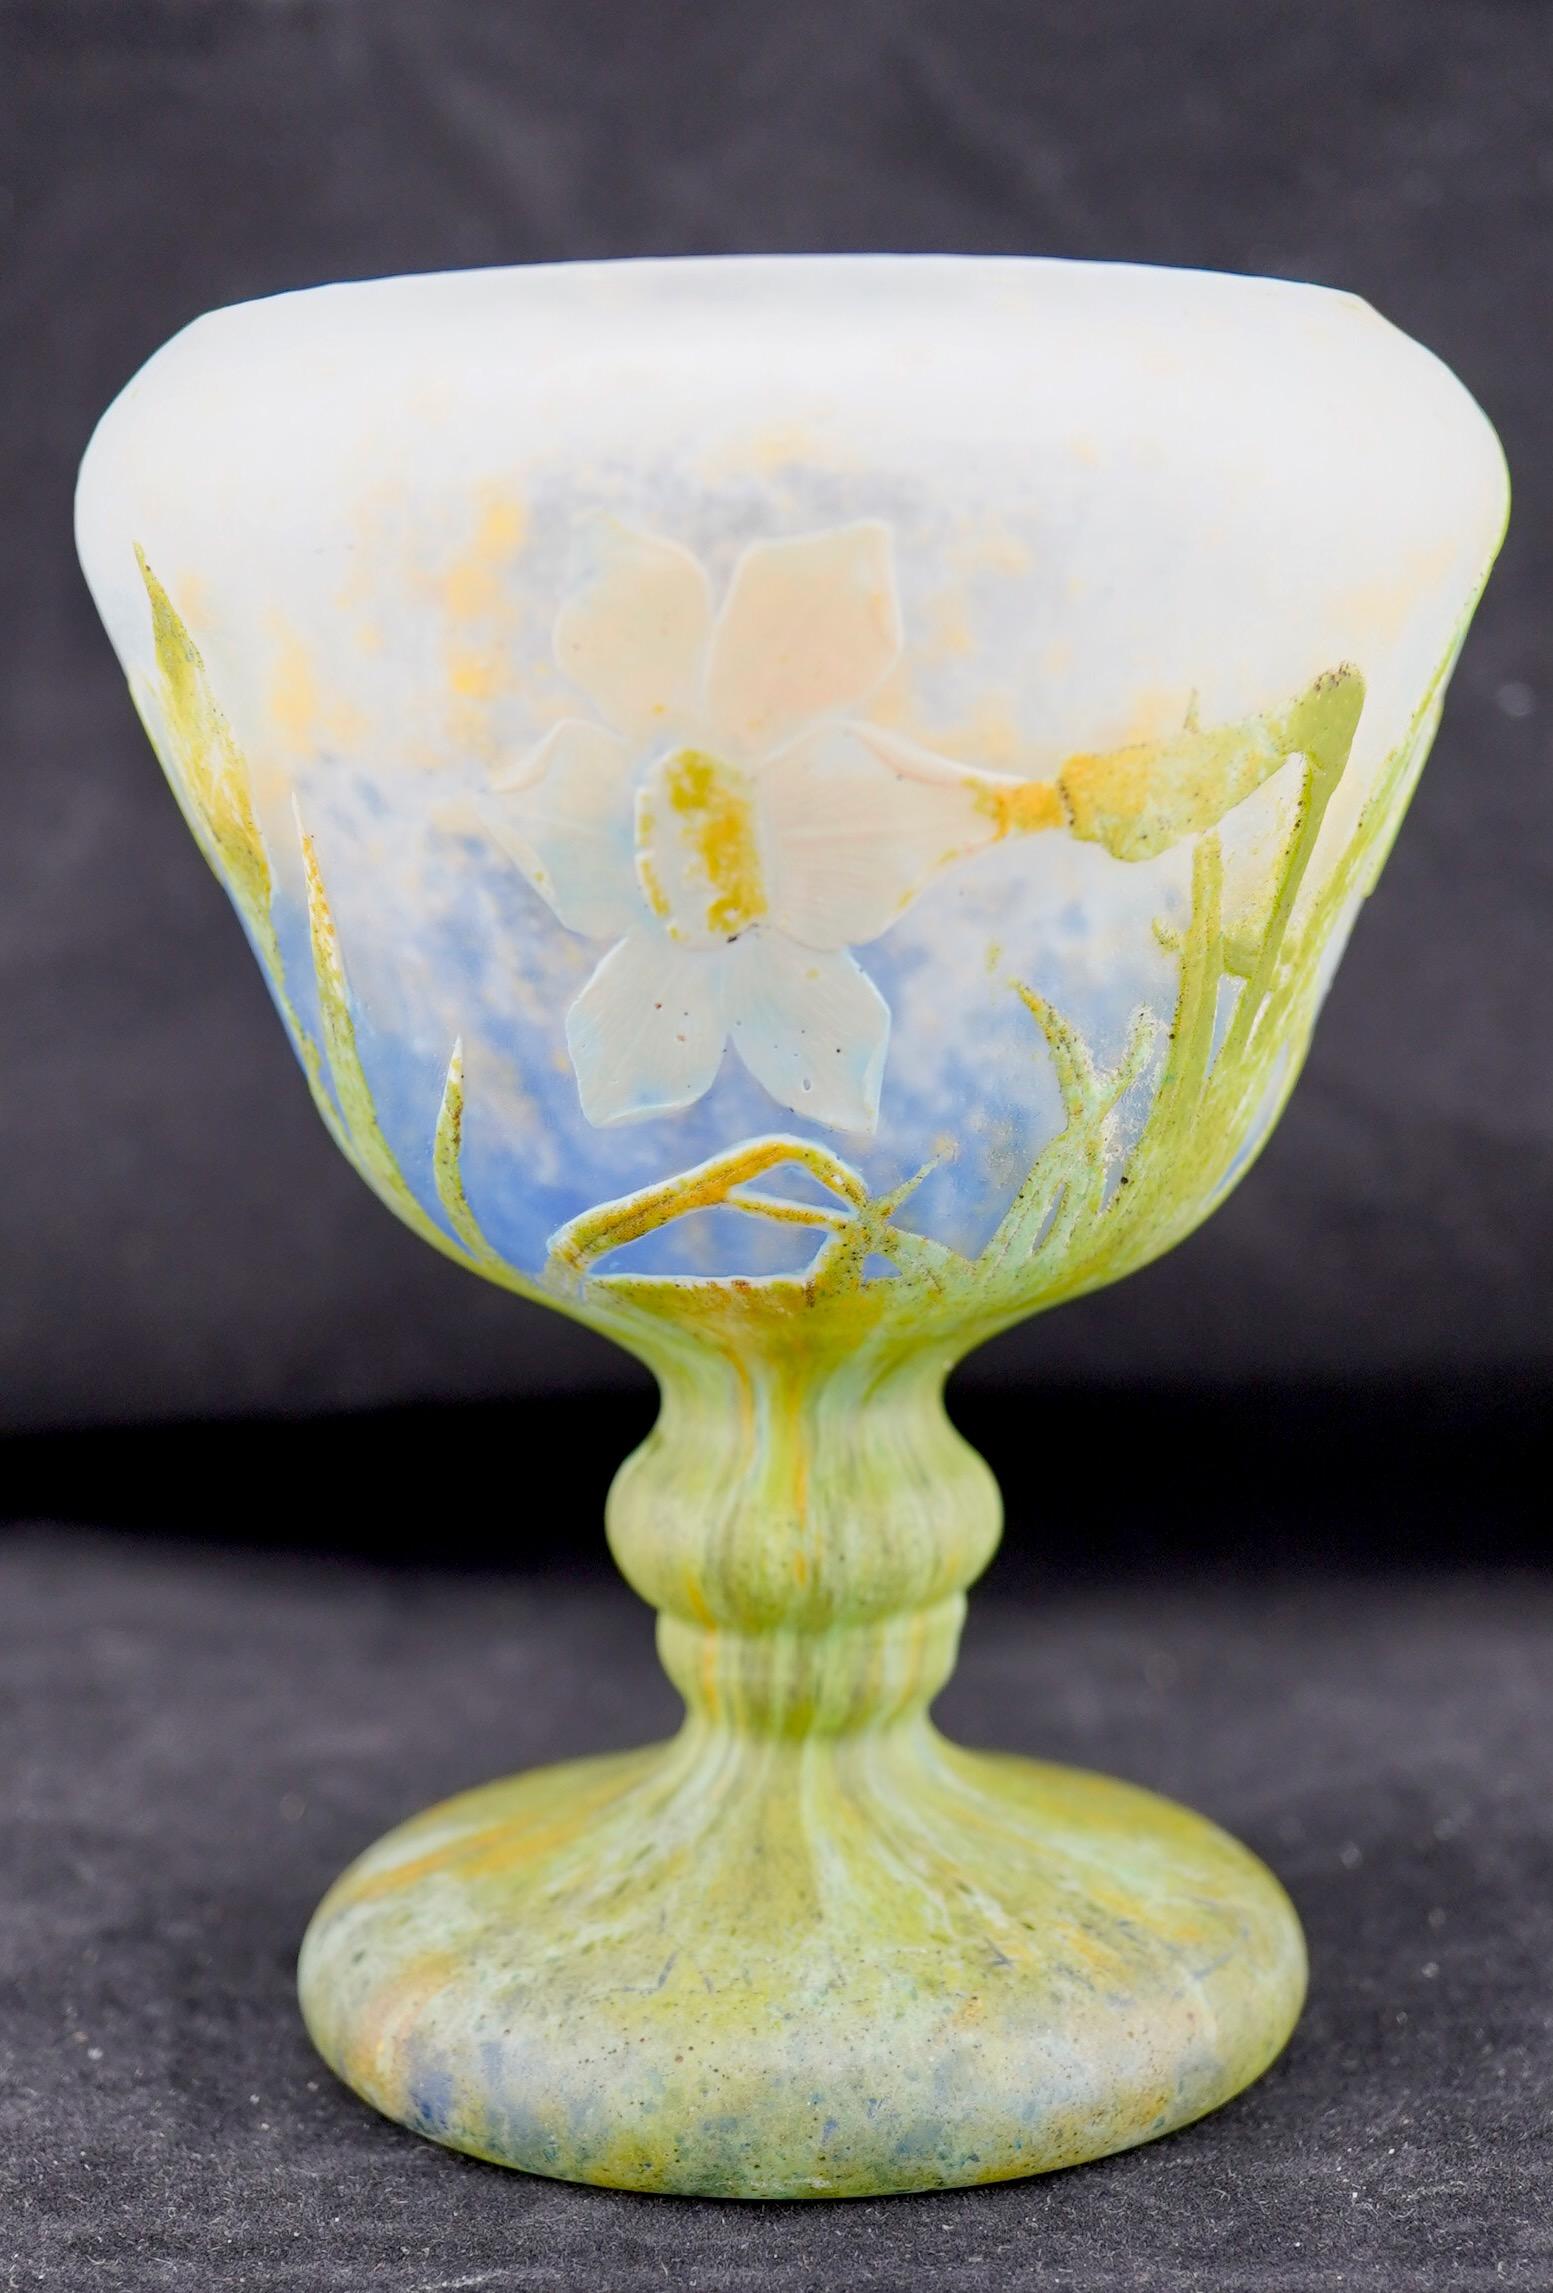 Very fine wheel carved and padded daffodil (jonquilles) footed vase by Daum. Very fine example of Daum Art Nouveau Work. Siged on the bottom with Daum Nancy mark and Croix de Lorraine.